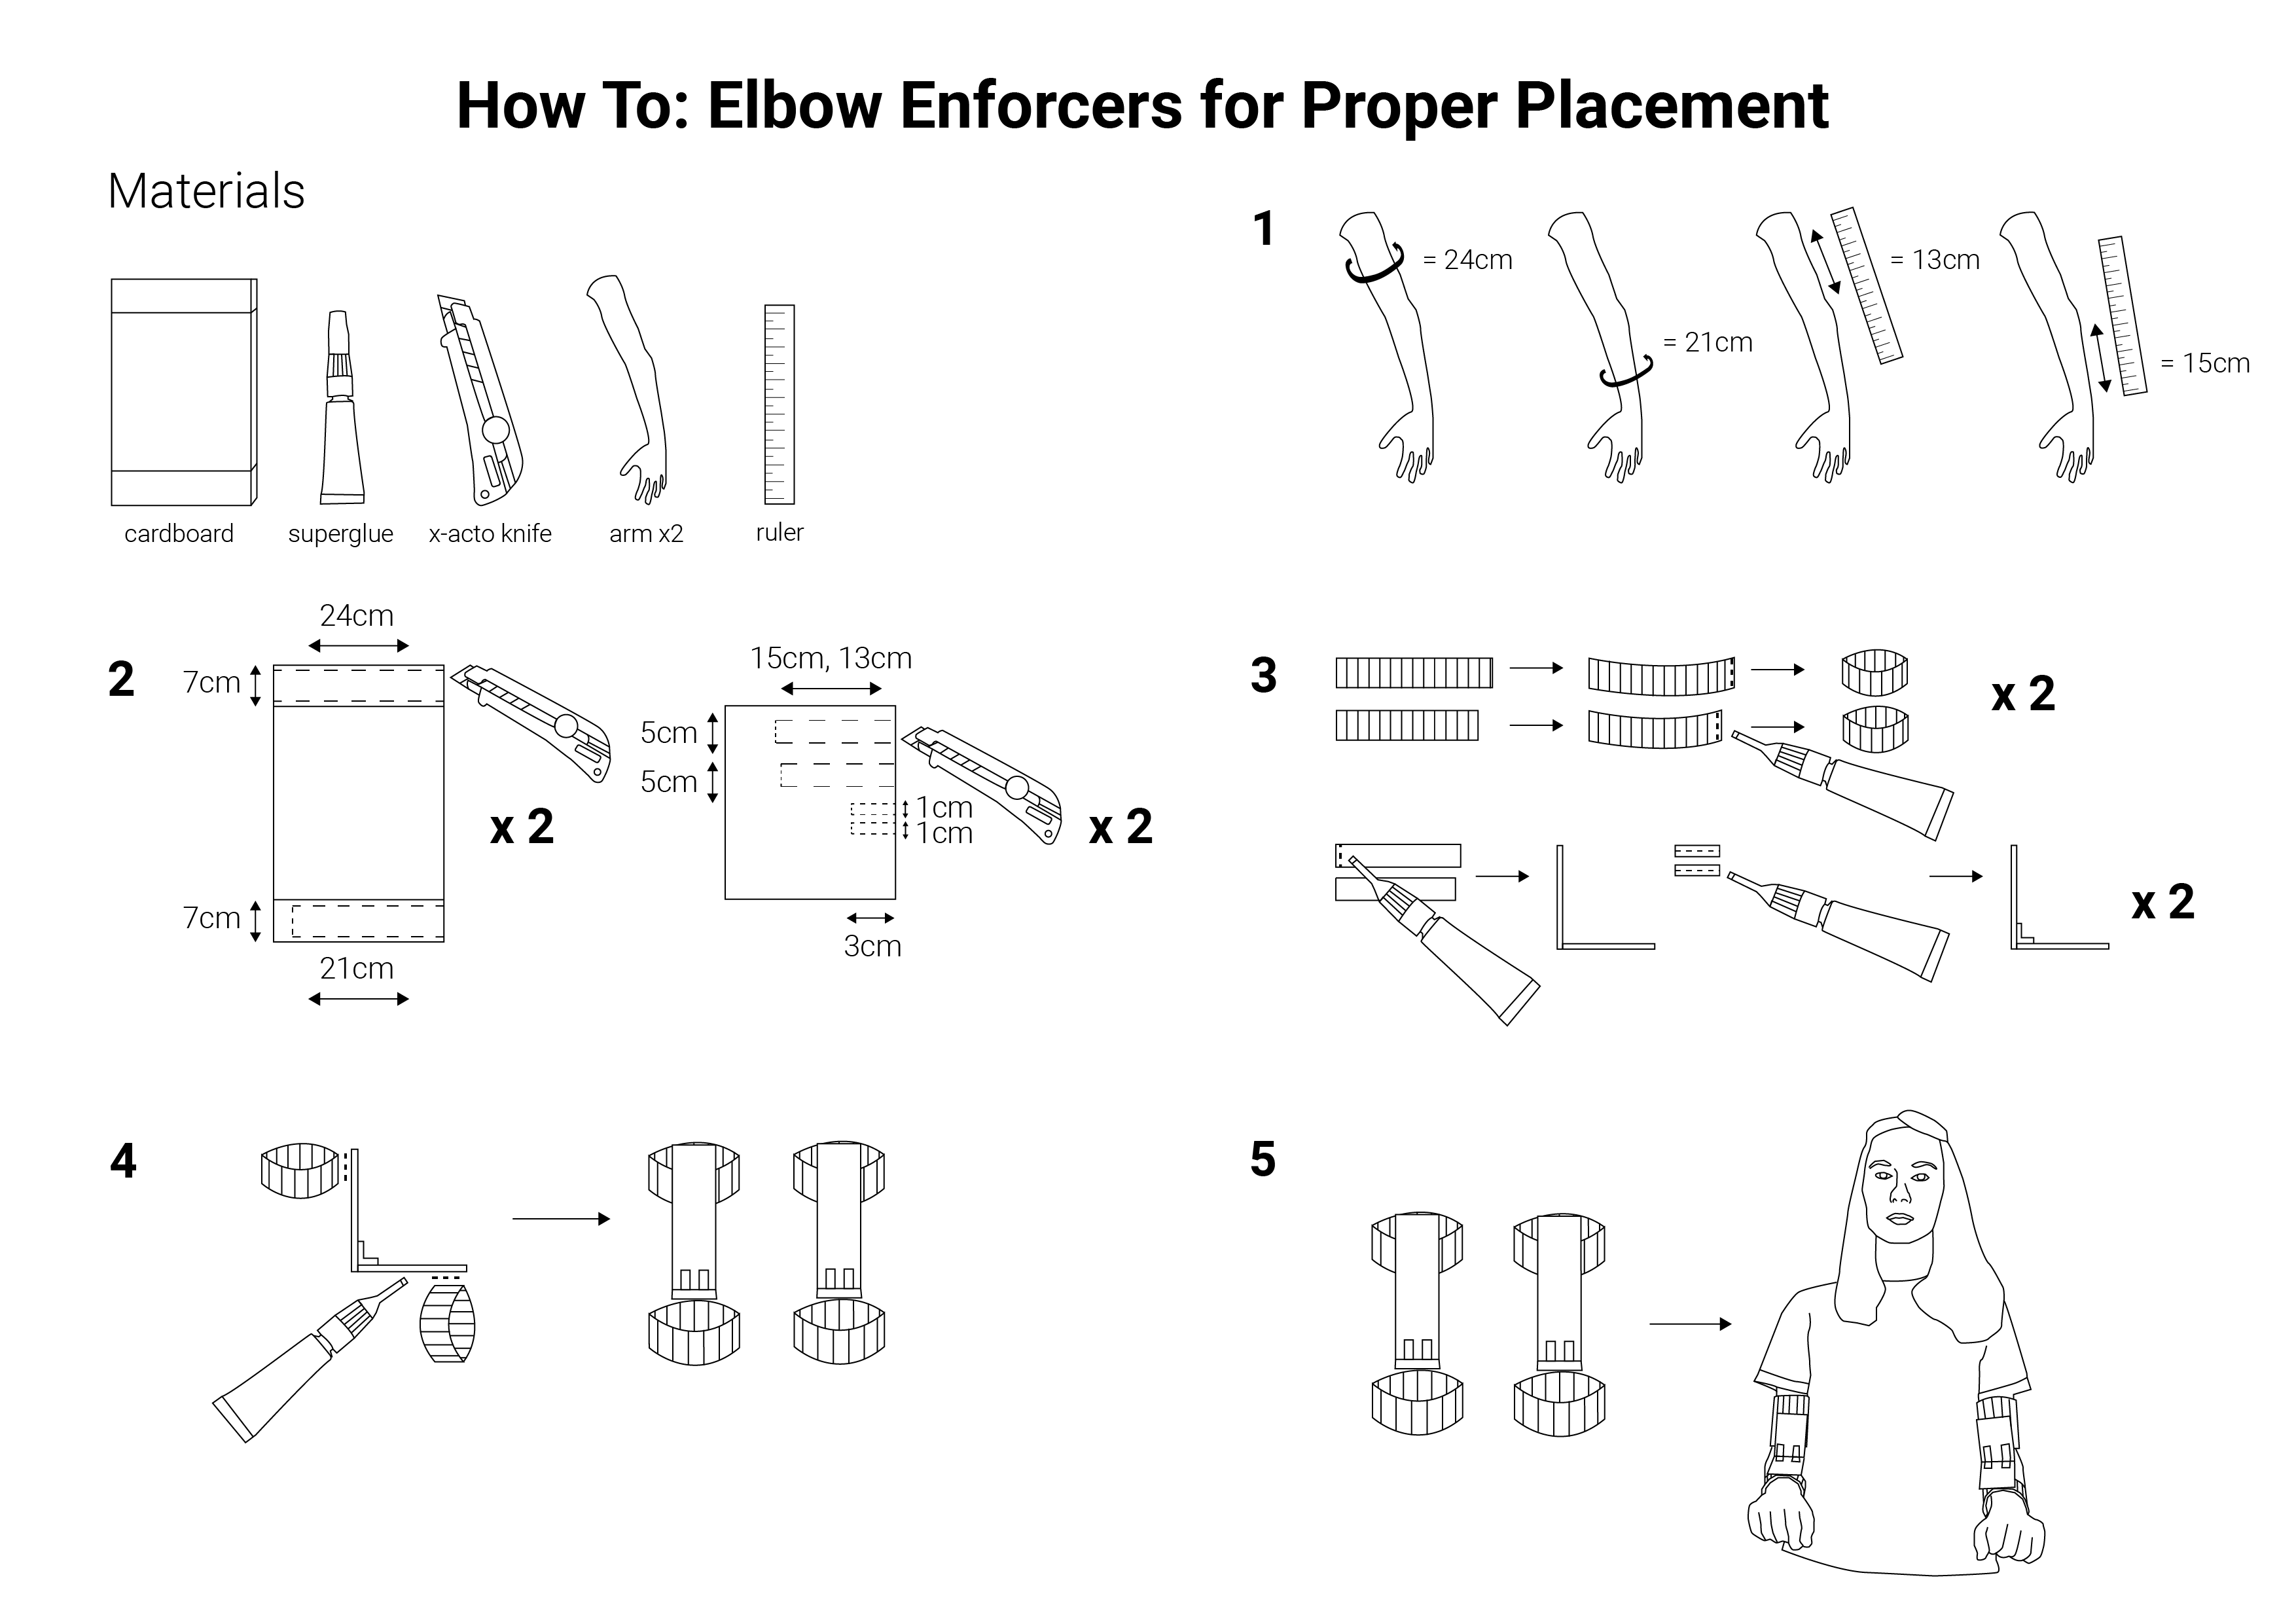 How-to-elbow-enforcers-for-proper-placement-01.png